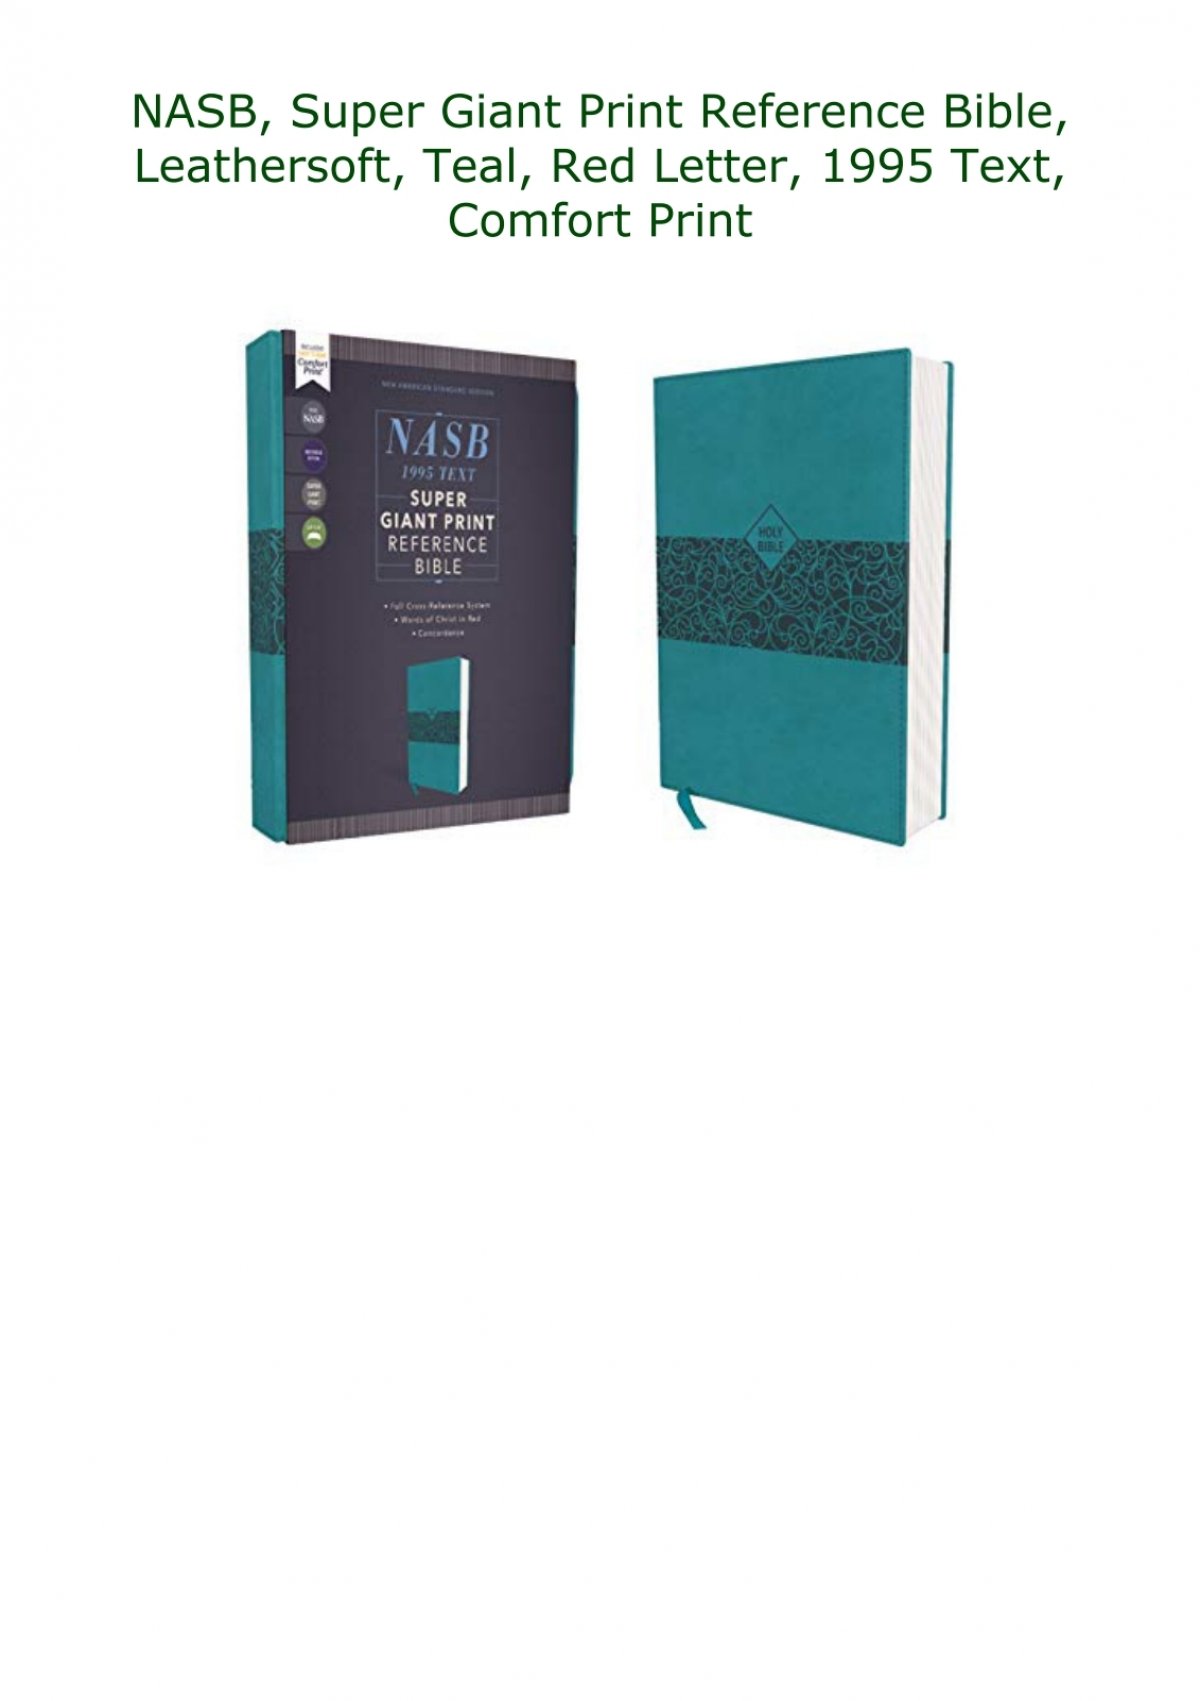 download-pdf-nasb-super-giant-print-reference-bible-leathersoft-teal-red-letter-1995